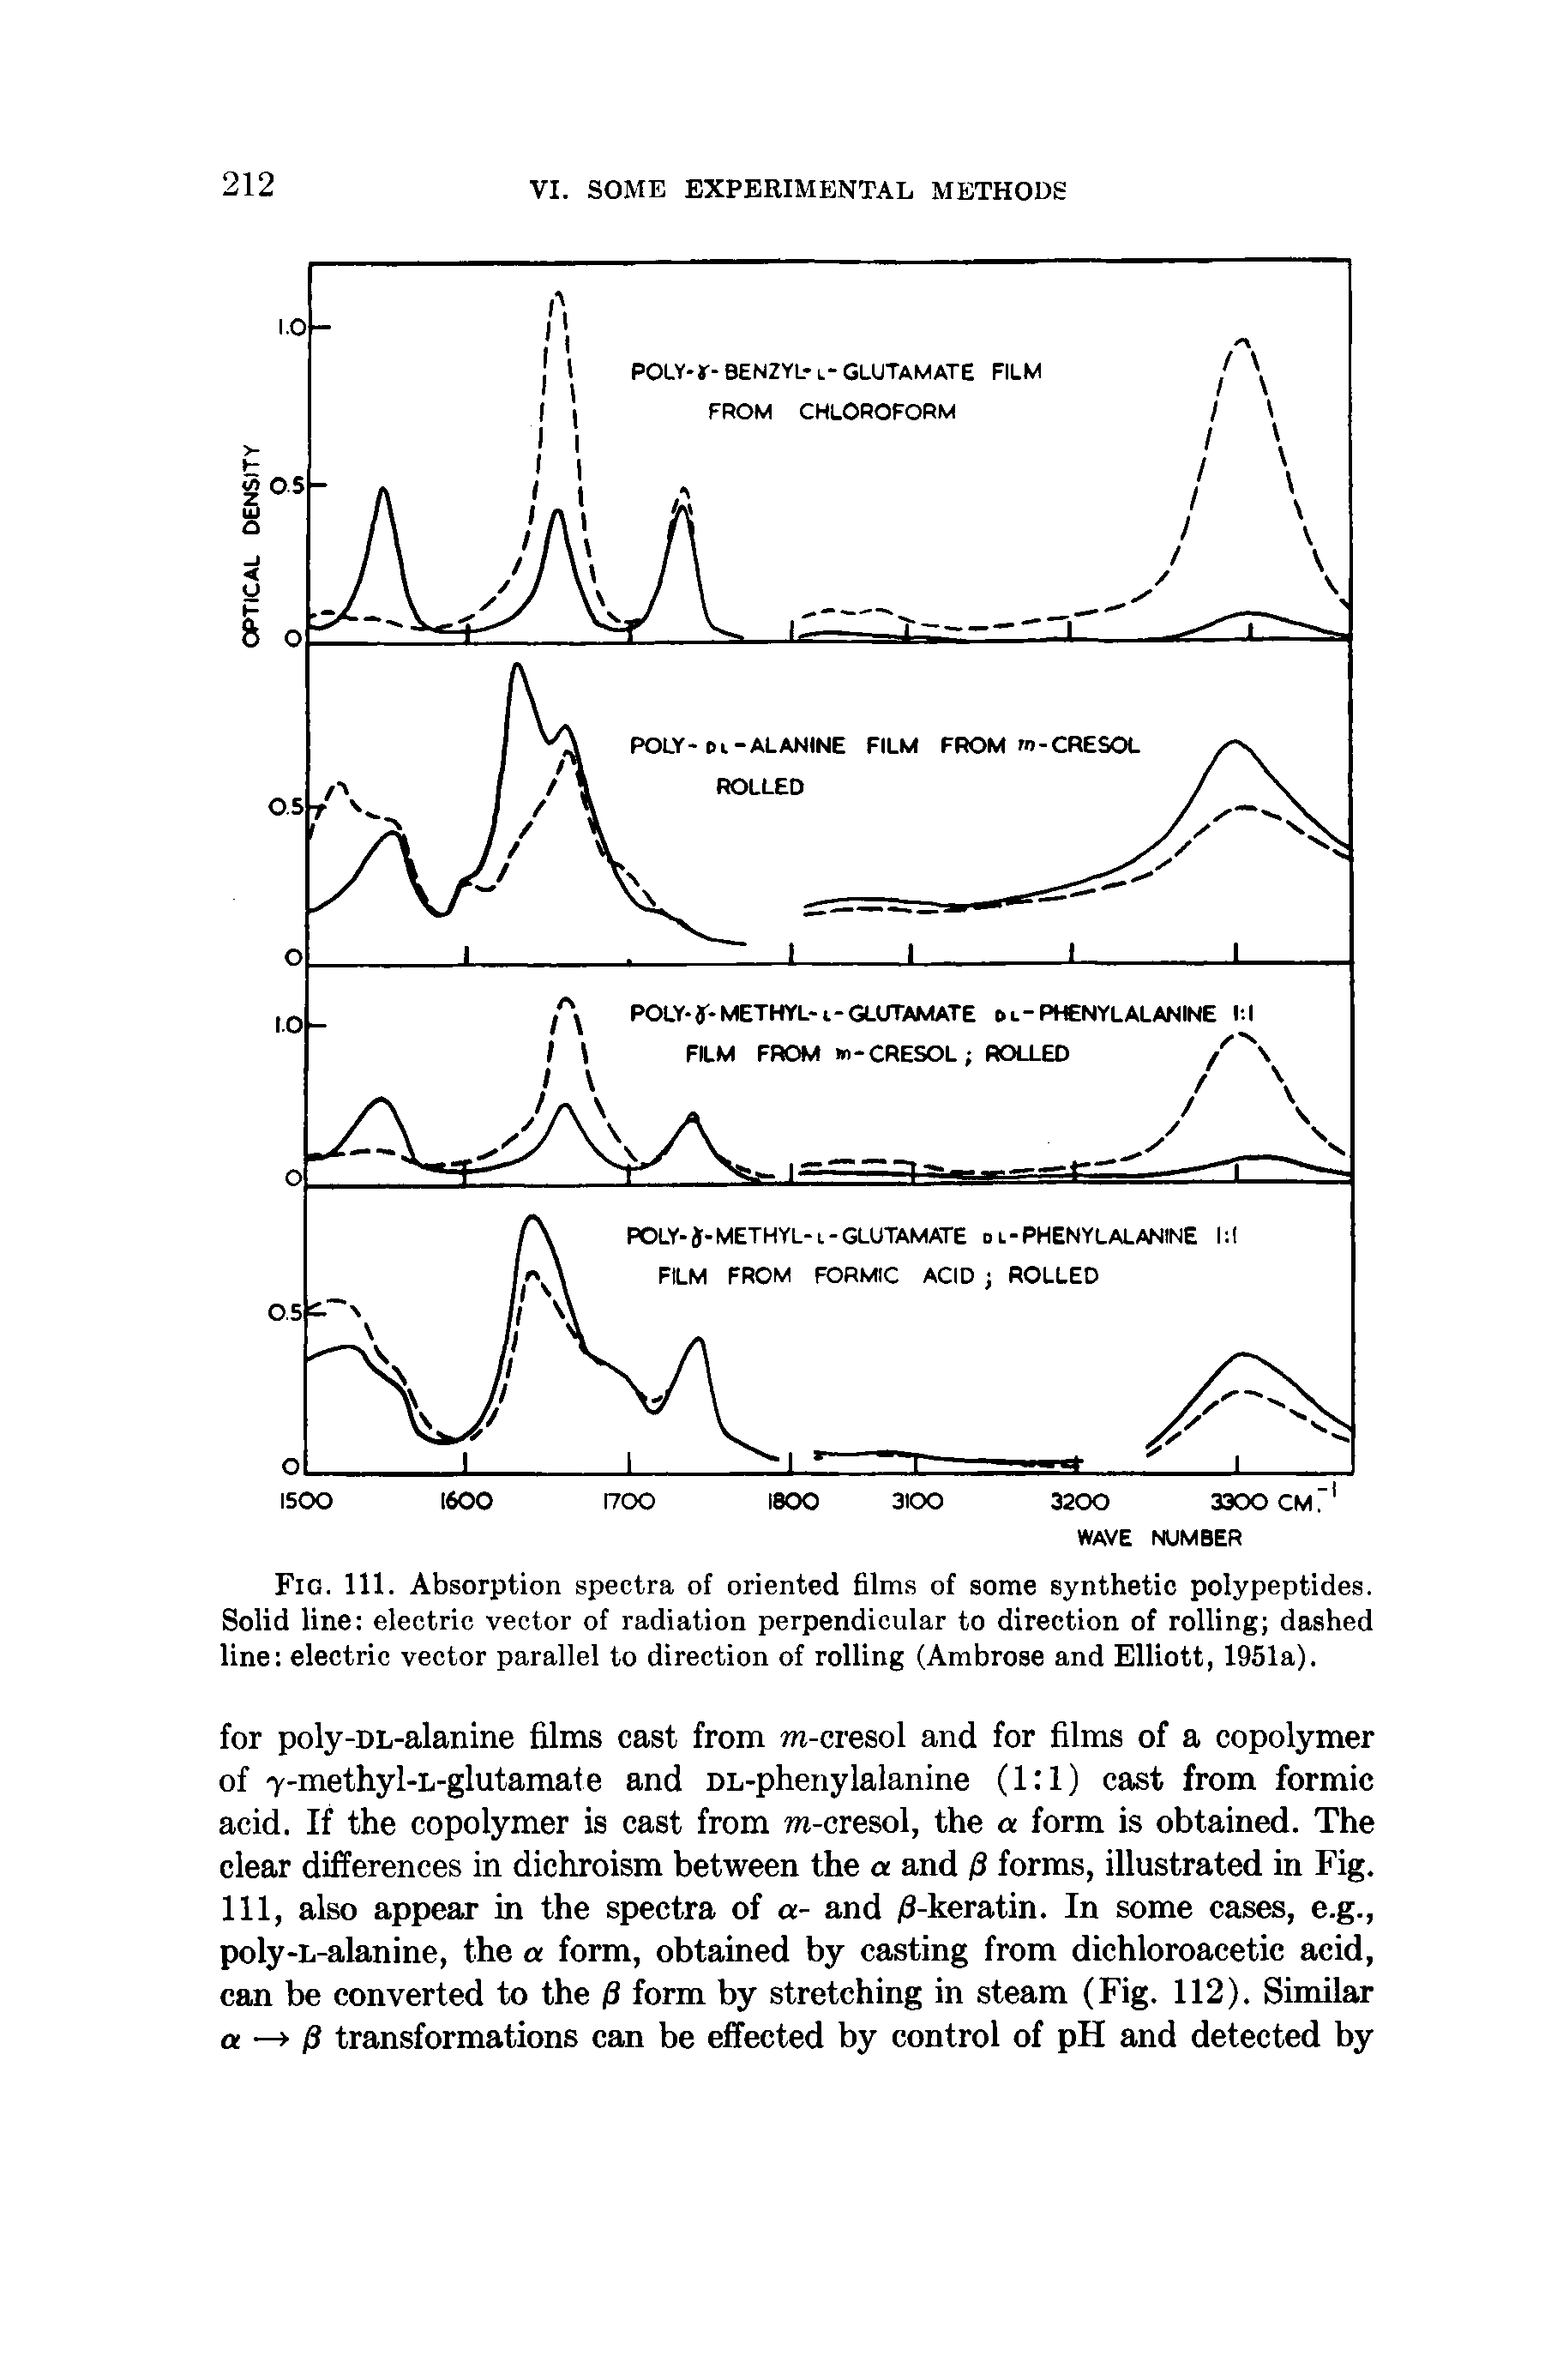 Fig. 111. Absorption spectra of oriented films of some synthetic polypeptides. Solid line electric vector of radiation perpendicular to direction of rolling dashed line electric vector parallel to direction of rolling (Ambrose and Elliott, 1951a).